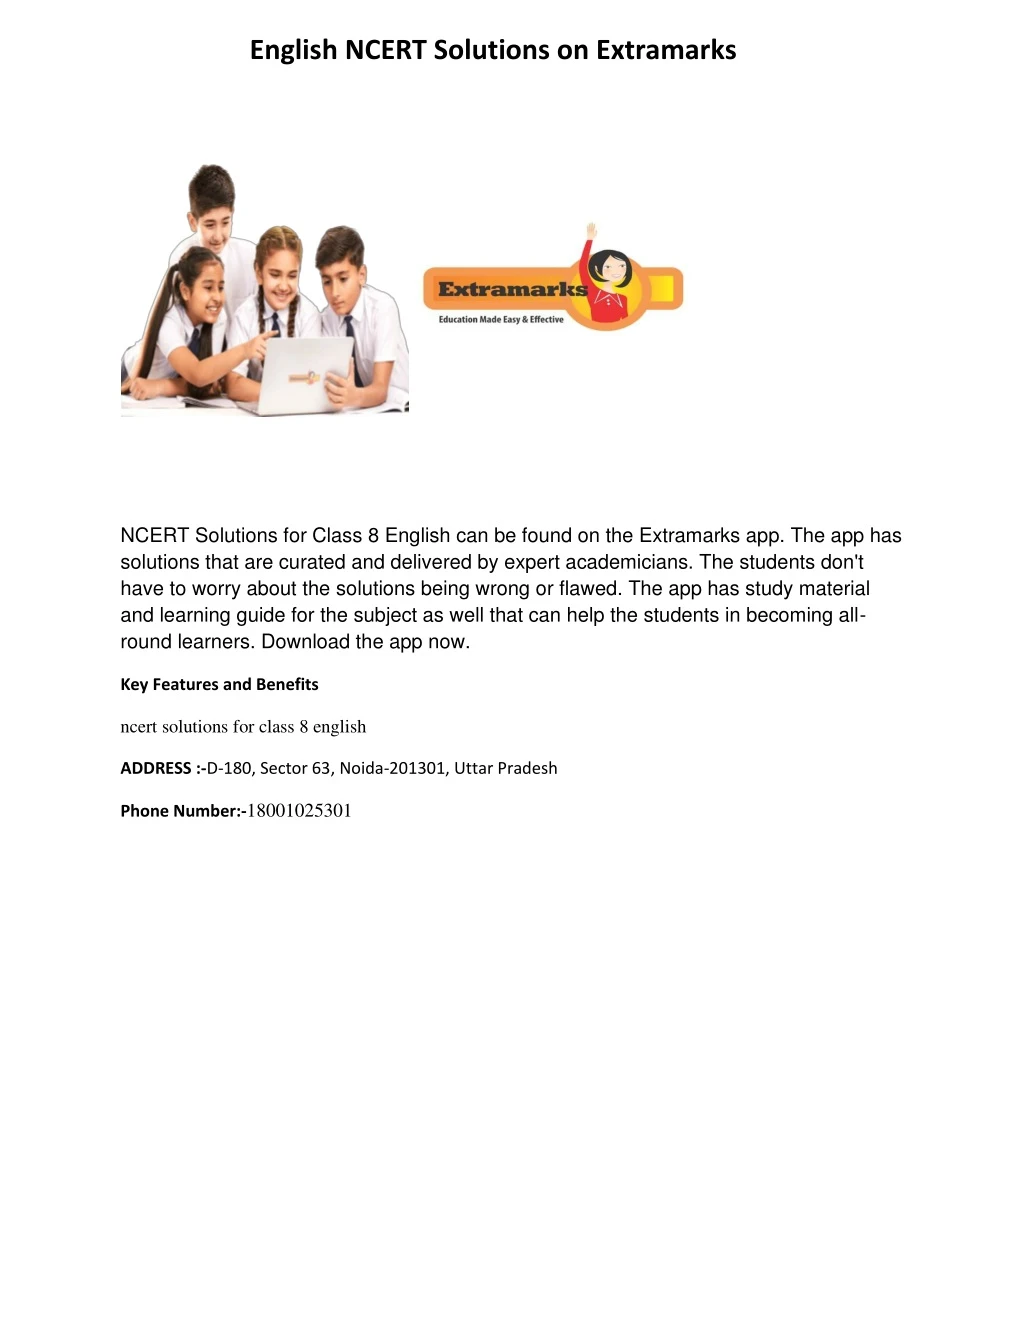 english ncert solutions on extramarks